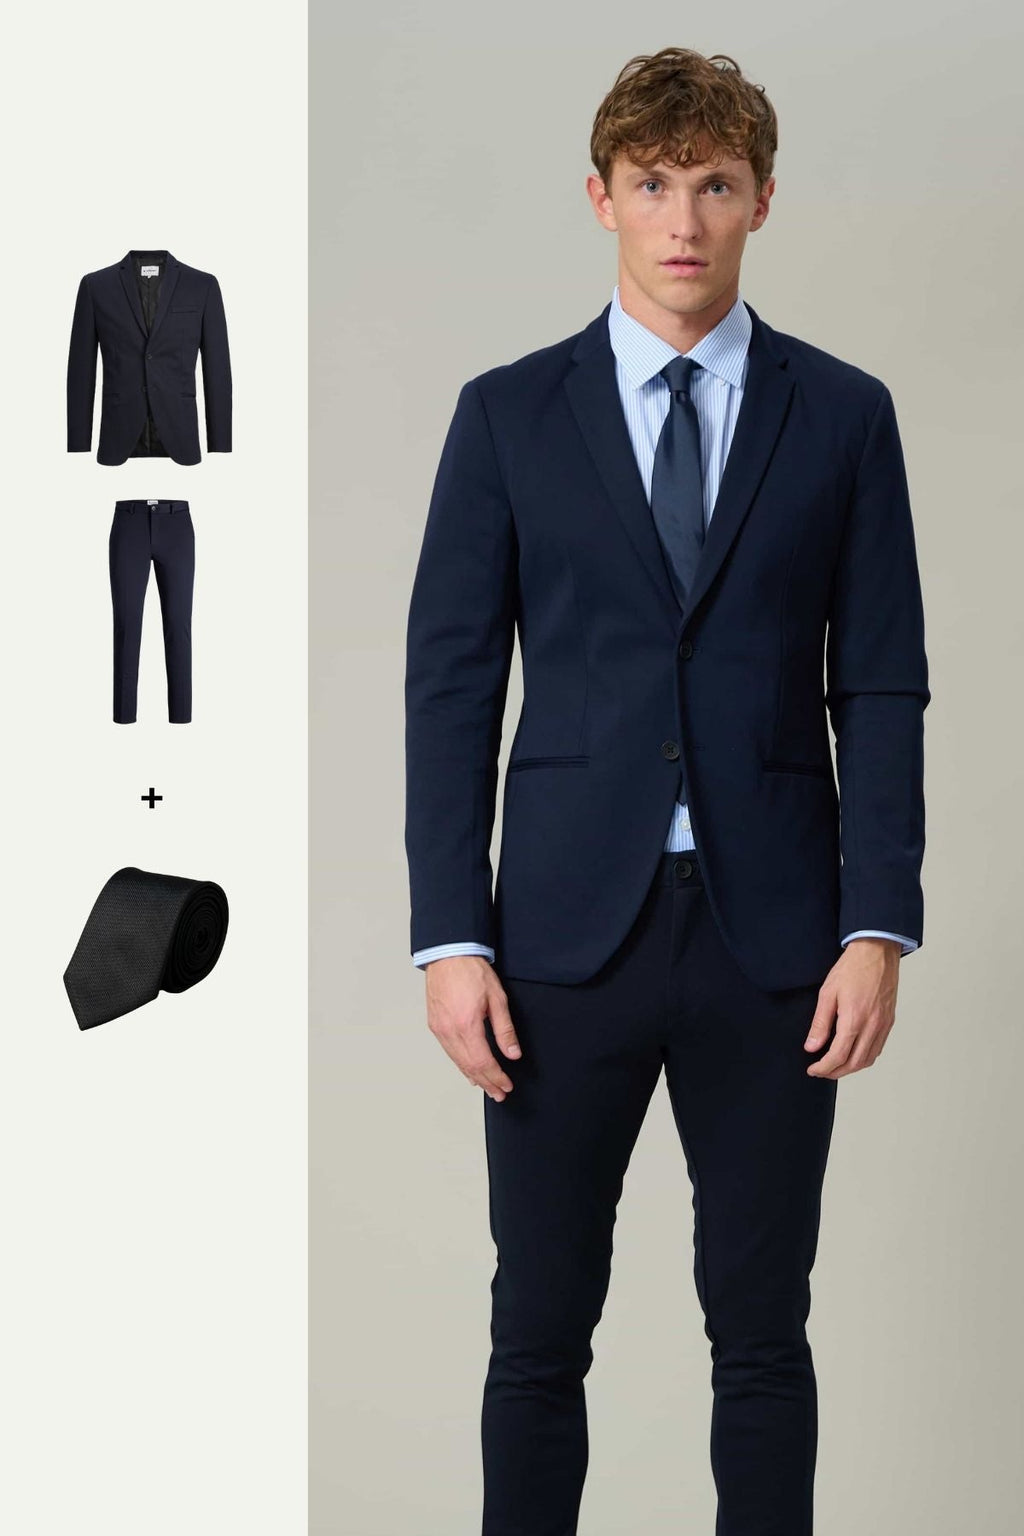 The Original Performance Suit™️ (Navy) + Tie - Package Deal (V.I.P)